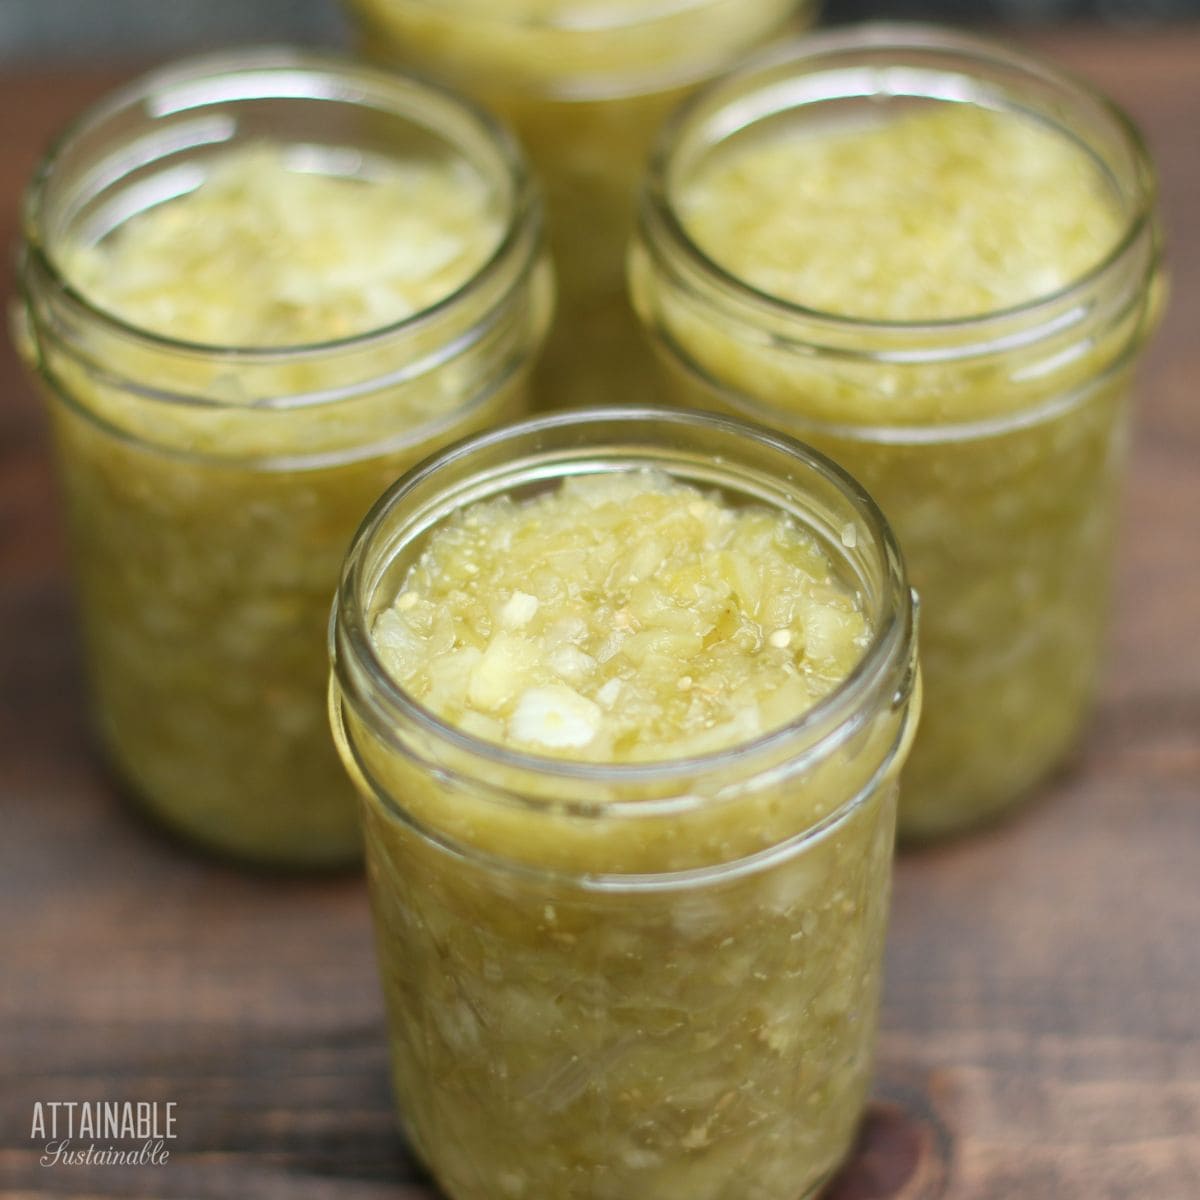 Green Tomato Chow Chow Relish from Attainable Sustainable